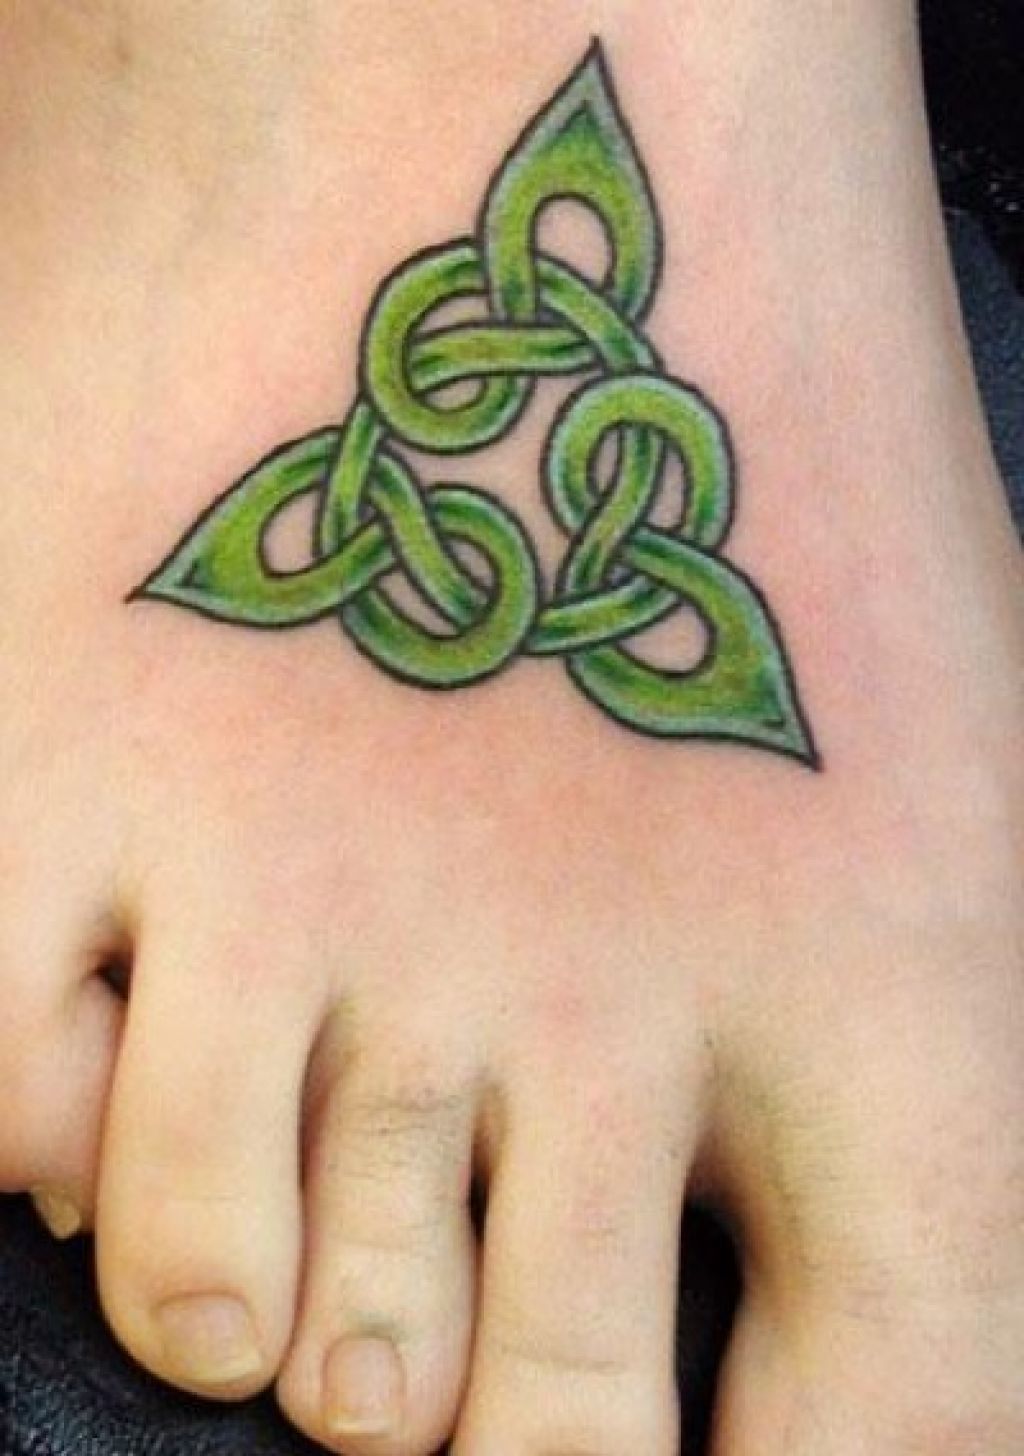 Green Celtic Knot Tattoo On Right Foot